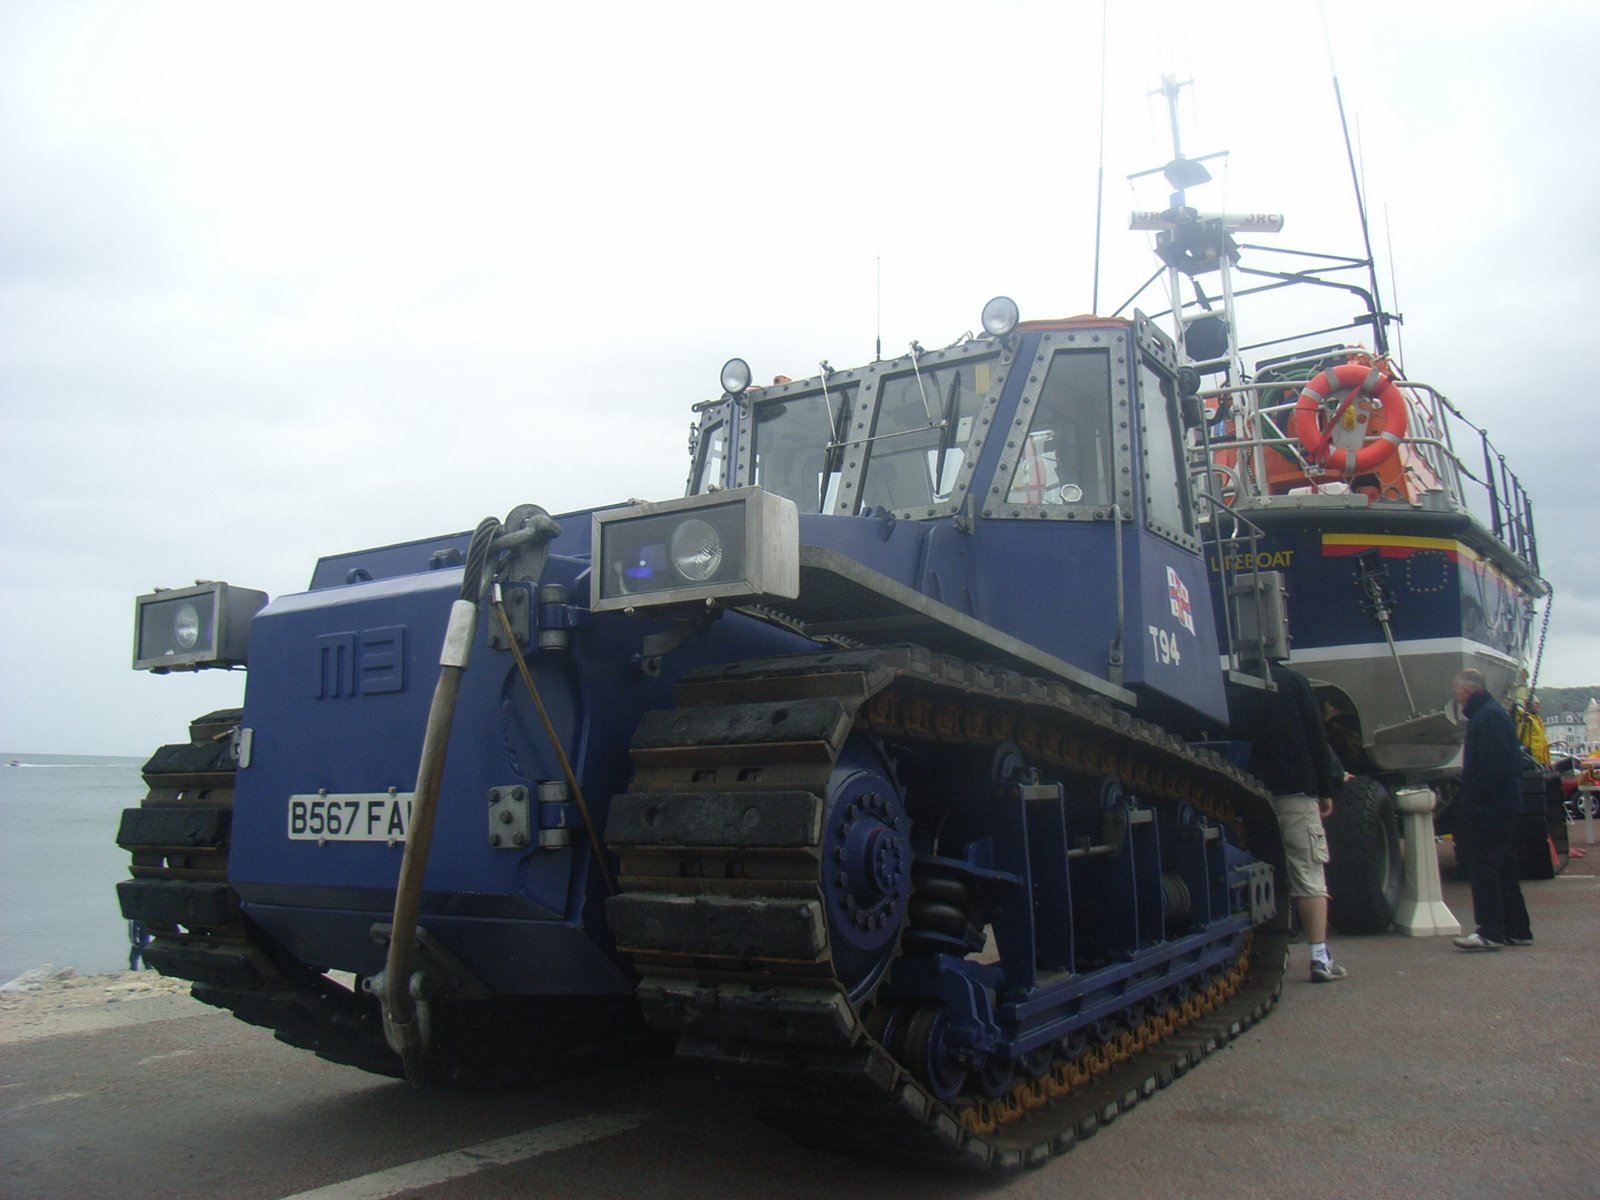 Tractor RNLI  M3 ( Royal National Lifeboat institute)